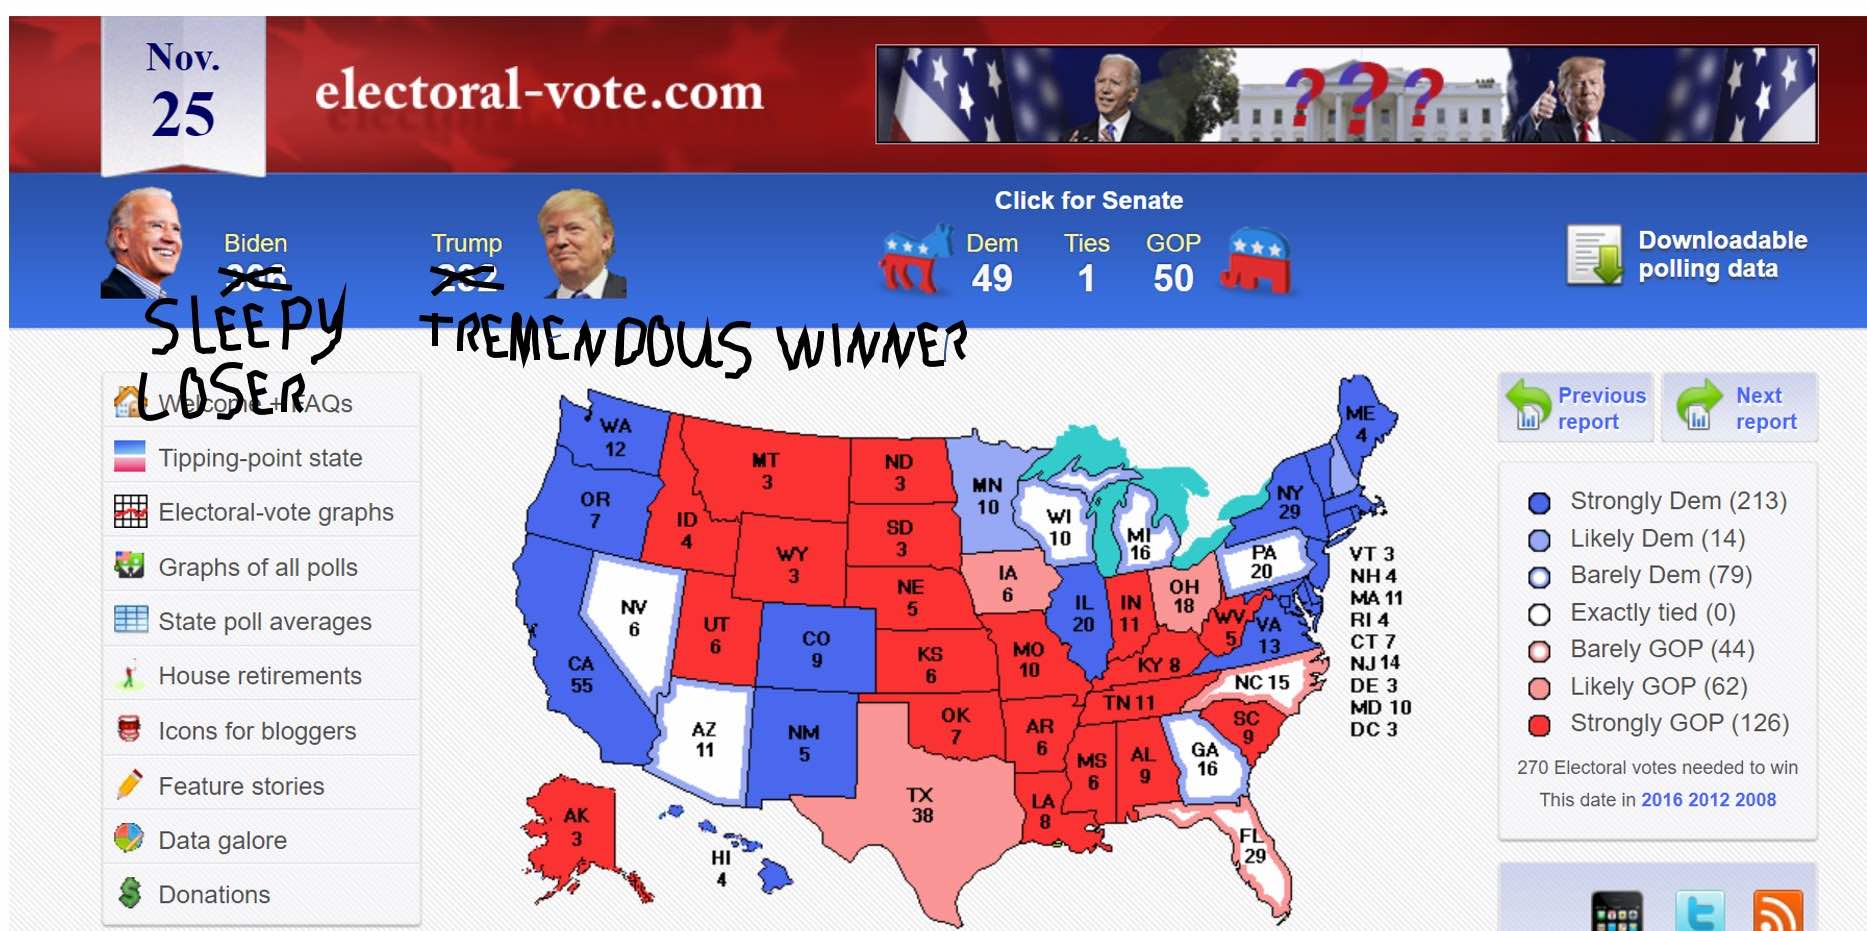 A screen cap of
our website has been doctored with a sharpie to label Joe Biden as a 'sleepy loser' and Donald Trump as a 
'tremendous winner'.